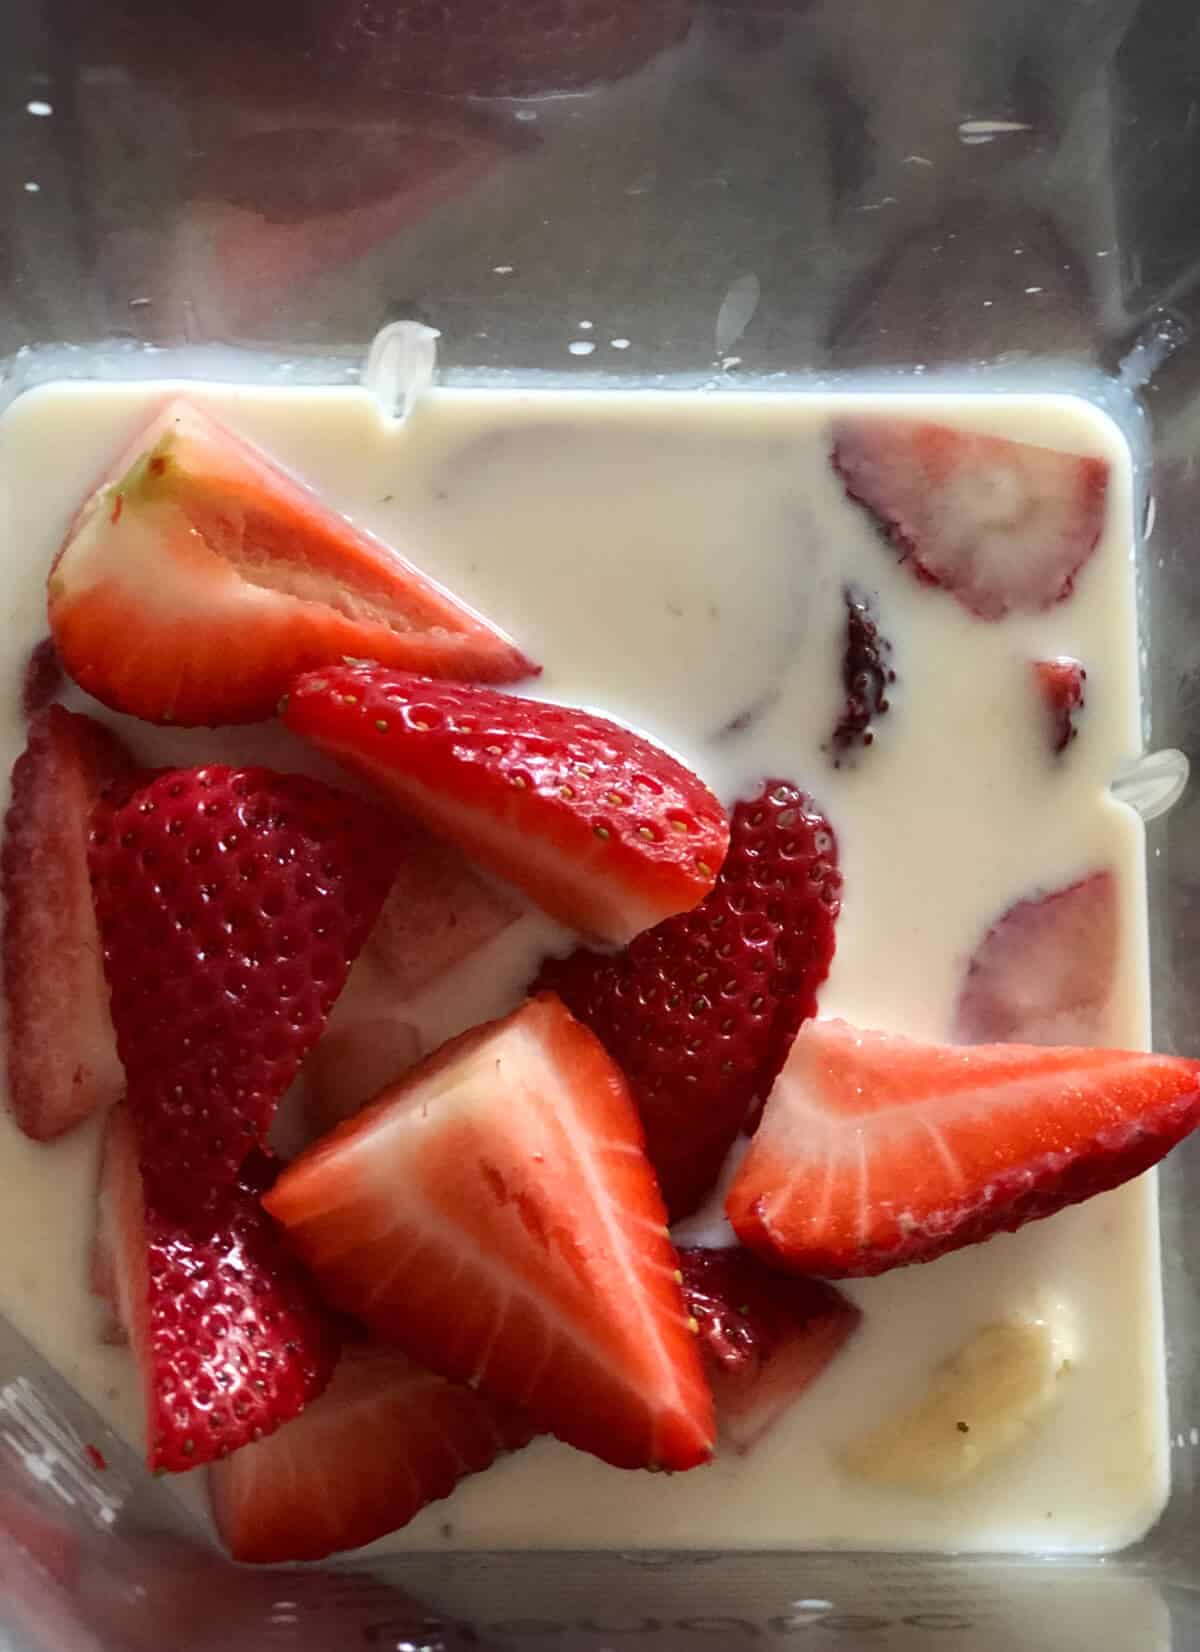 Strawberry, Banana and milk in a blender